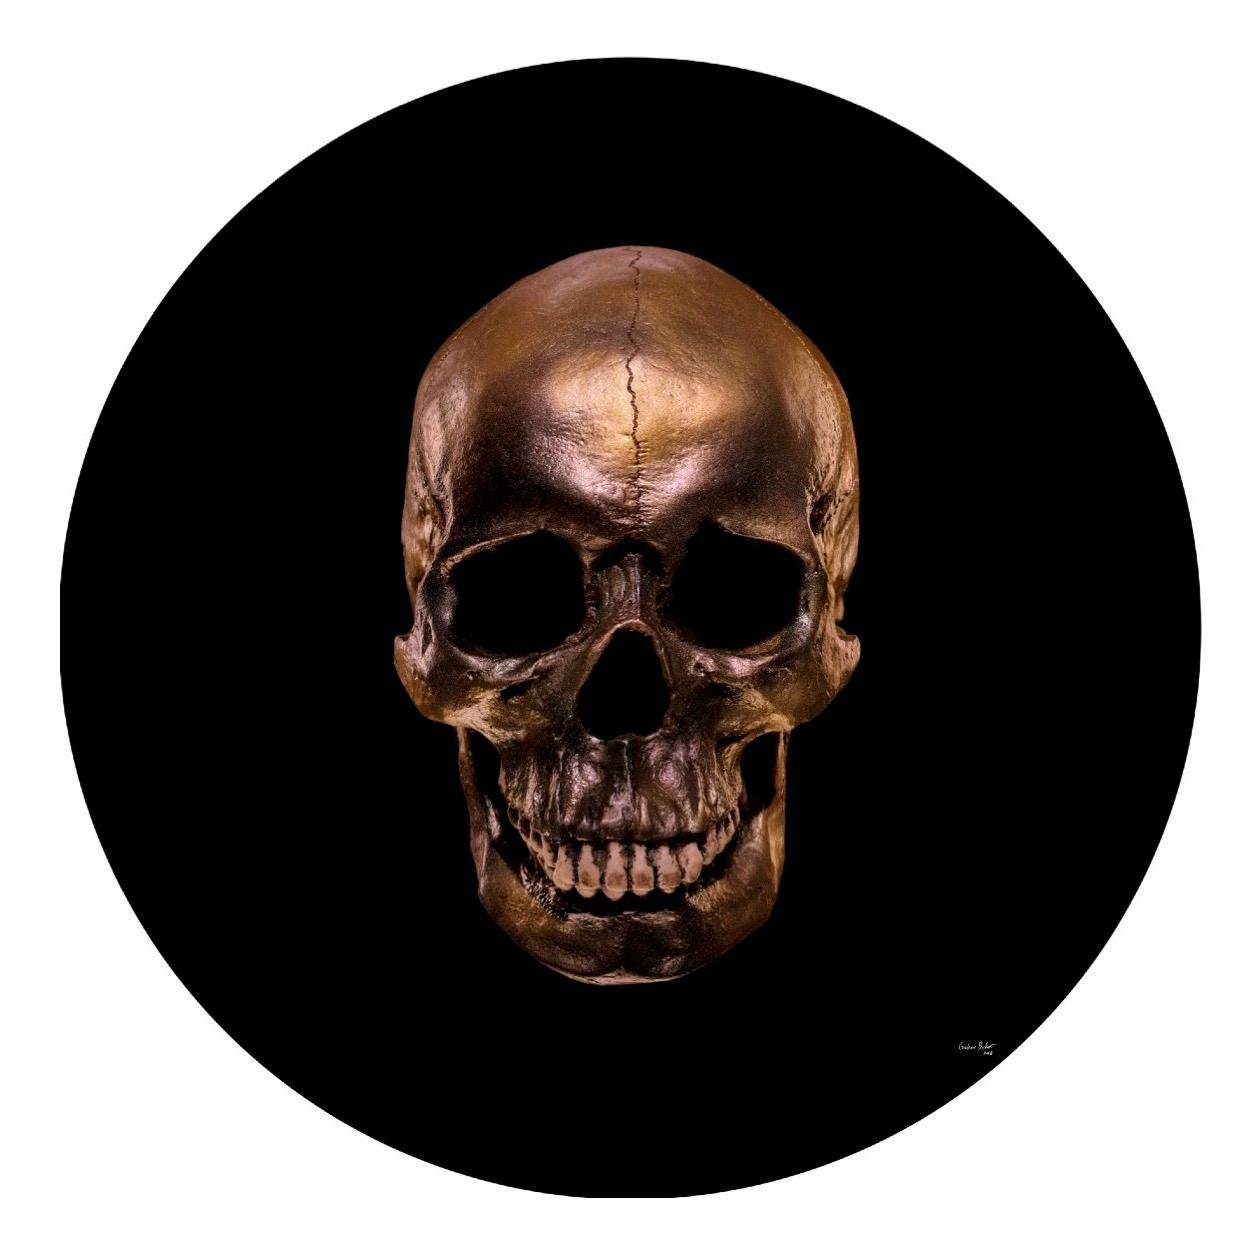 "SKGT-LED Transparent" Photography 50"D Edition 3/8 by Giuliano Bekor

From the SKULL series
Edition 3/8
Year created 2018
Print size 48 Inches diameter trim bleed
Artwork finish size 50 Inches diameter
Medium:
The artwork is printed on the highest